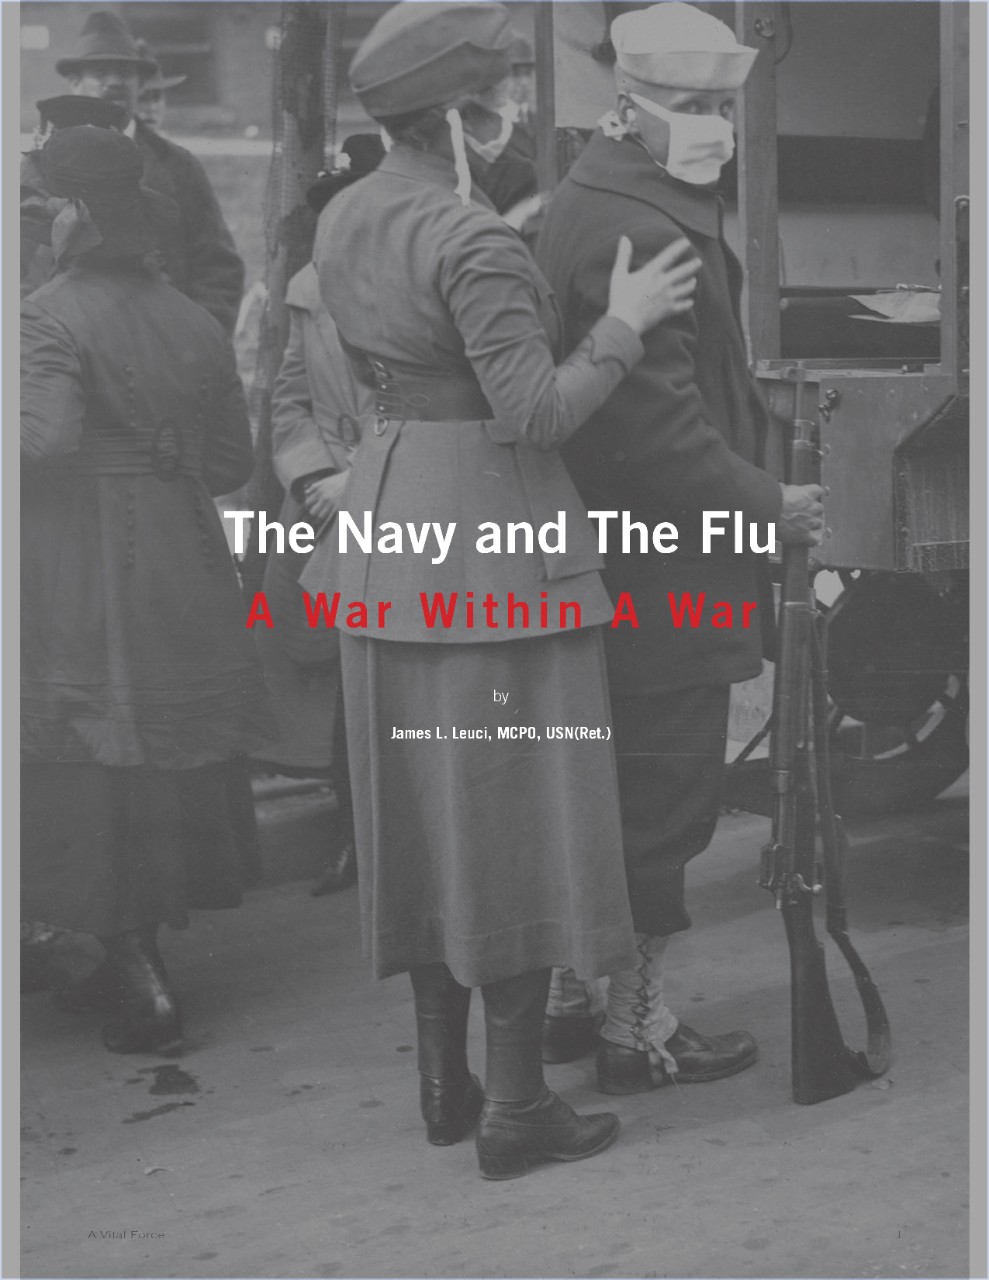 NMUSN_1918_The Navy and The Flu_JPG